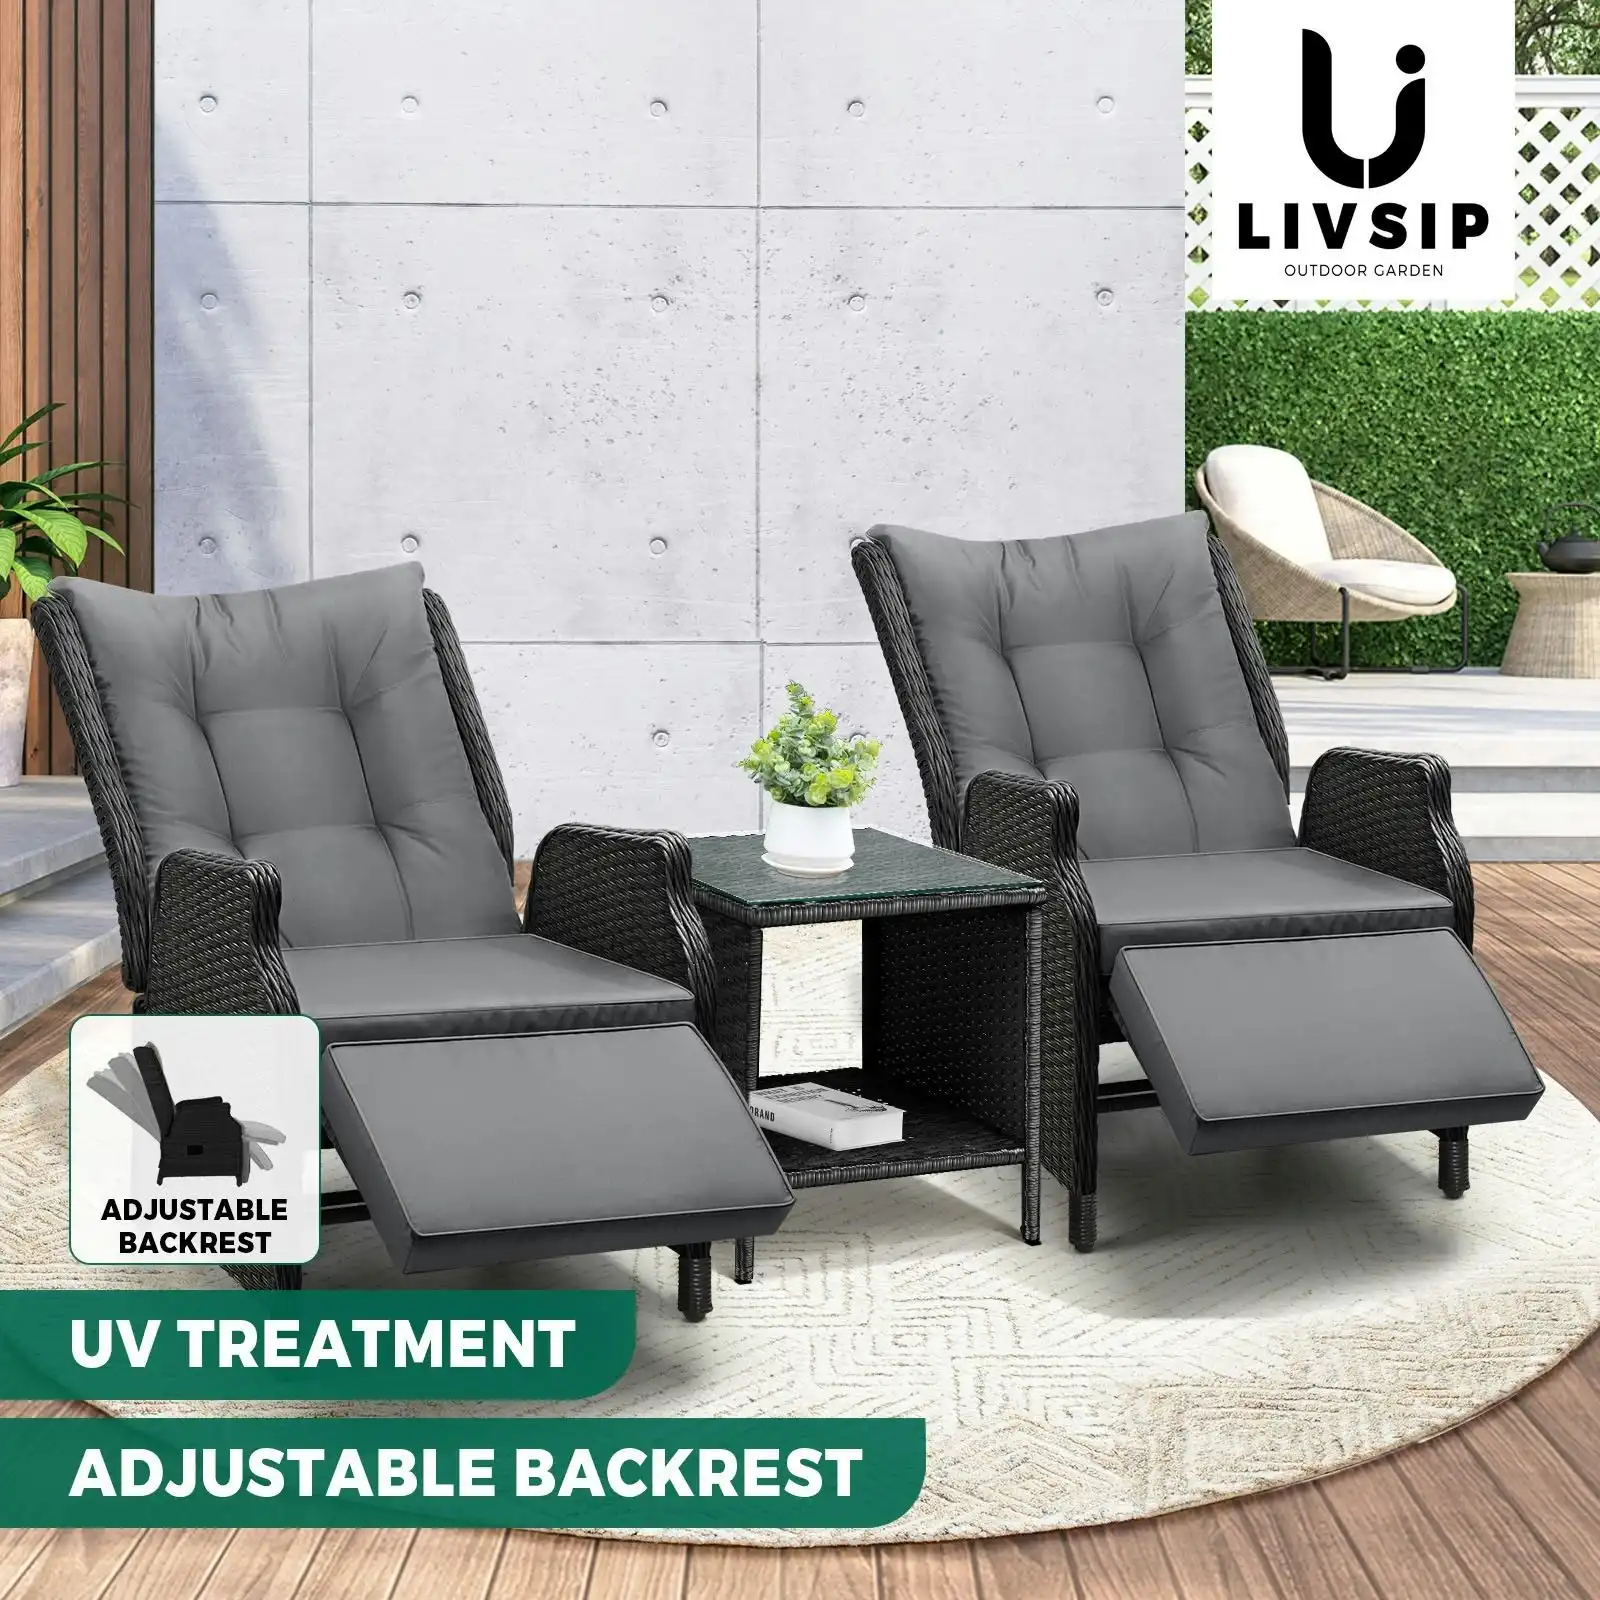 Livsip Sun Lounge Outdoor Recliner Chair &Table Outdoor Furniture Patio Set of 3